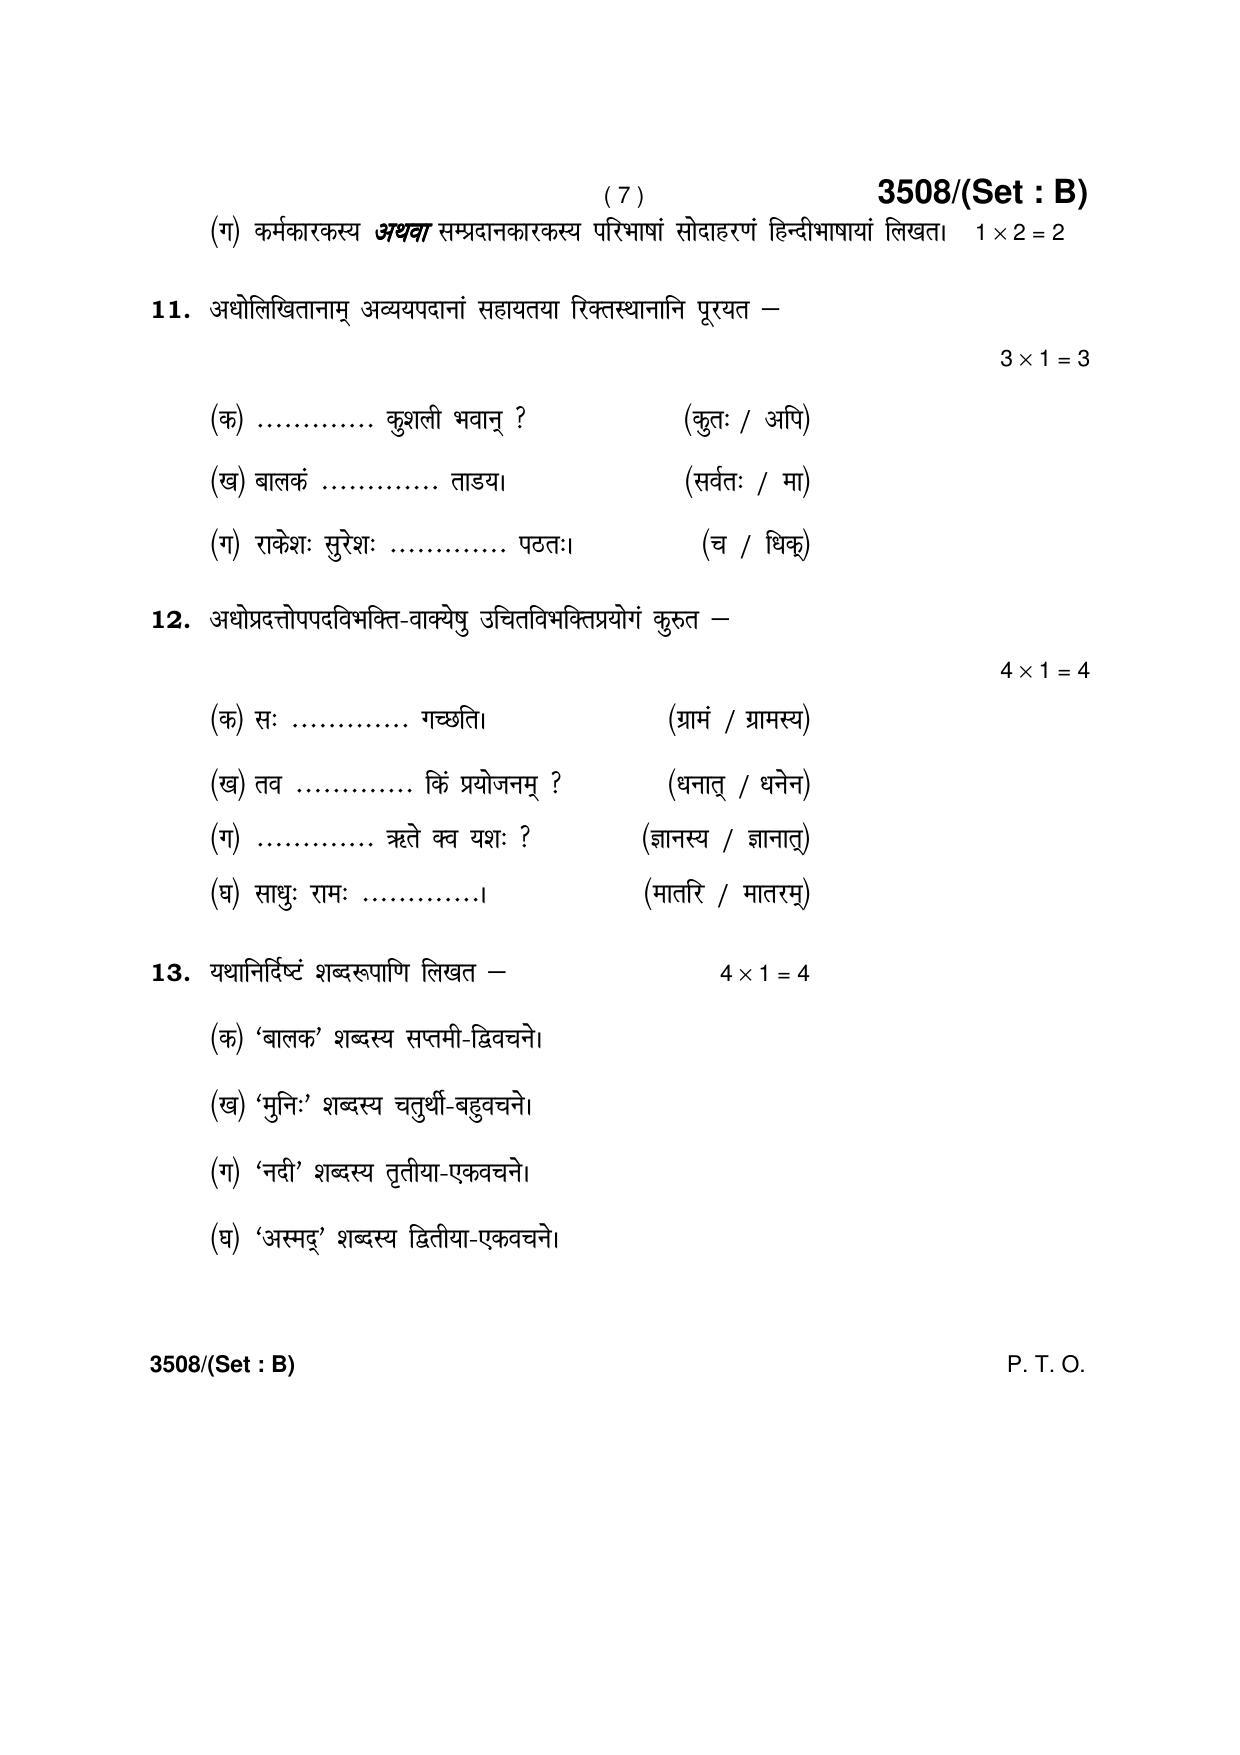 Haryana Board HBSE Class 10 Sanskrit -B 2018 Question Paper - Page 7